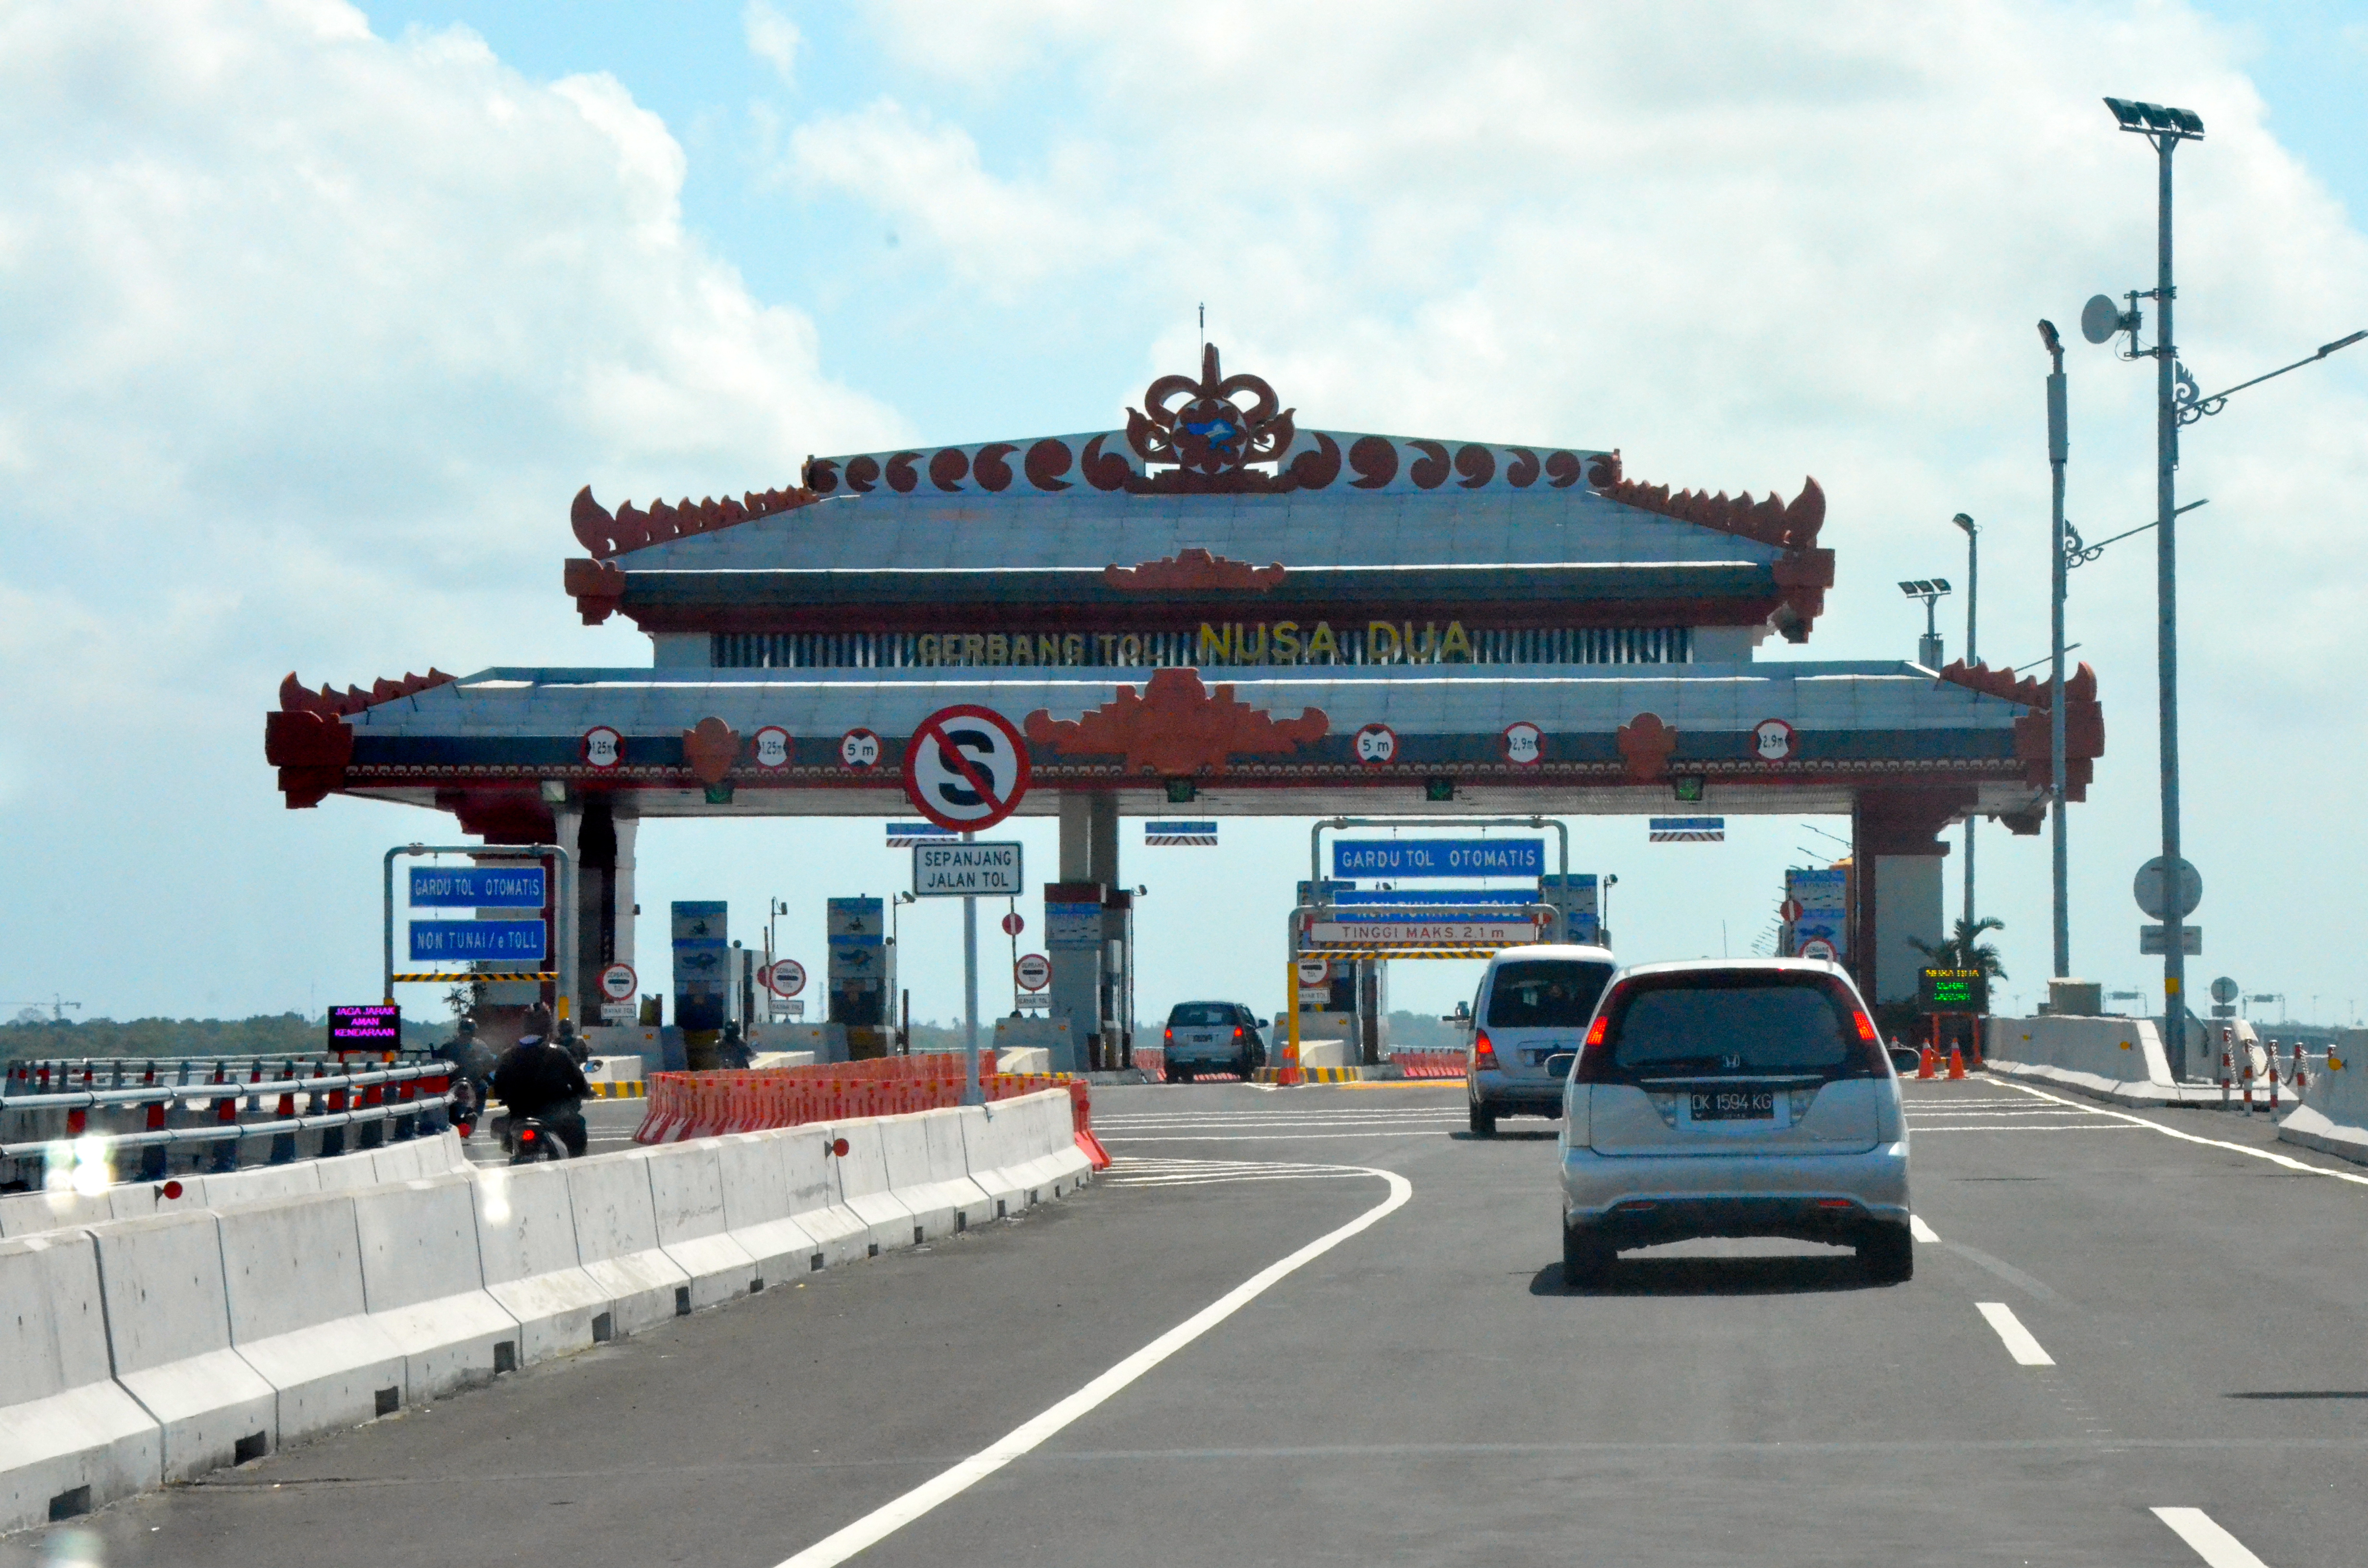 The underpass will connect to the Bali Mandara Toll Road, according to the Ministry of Public Works and Public Housing. Photo: Wikimedia Commons